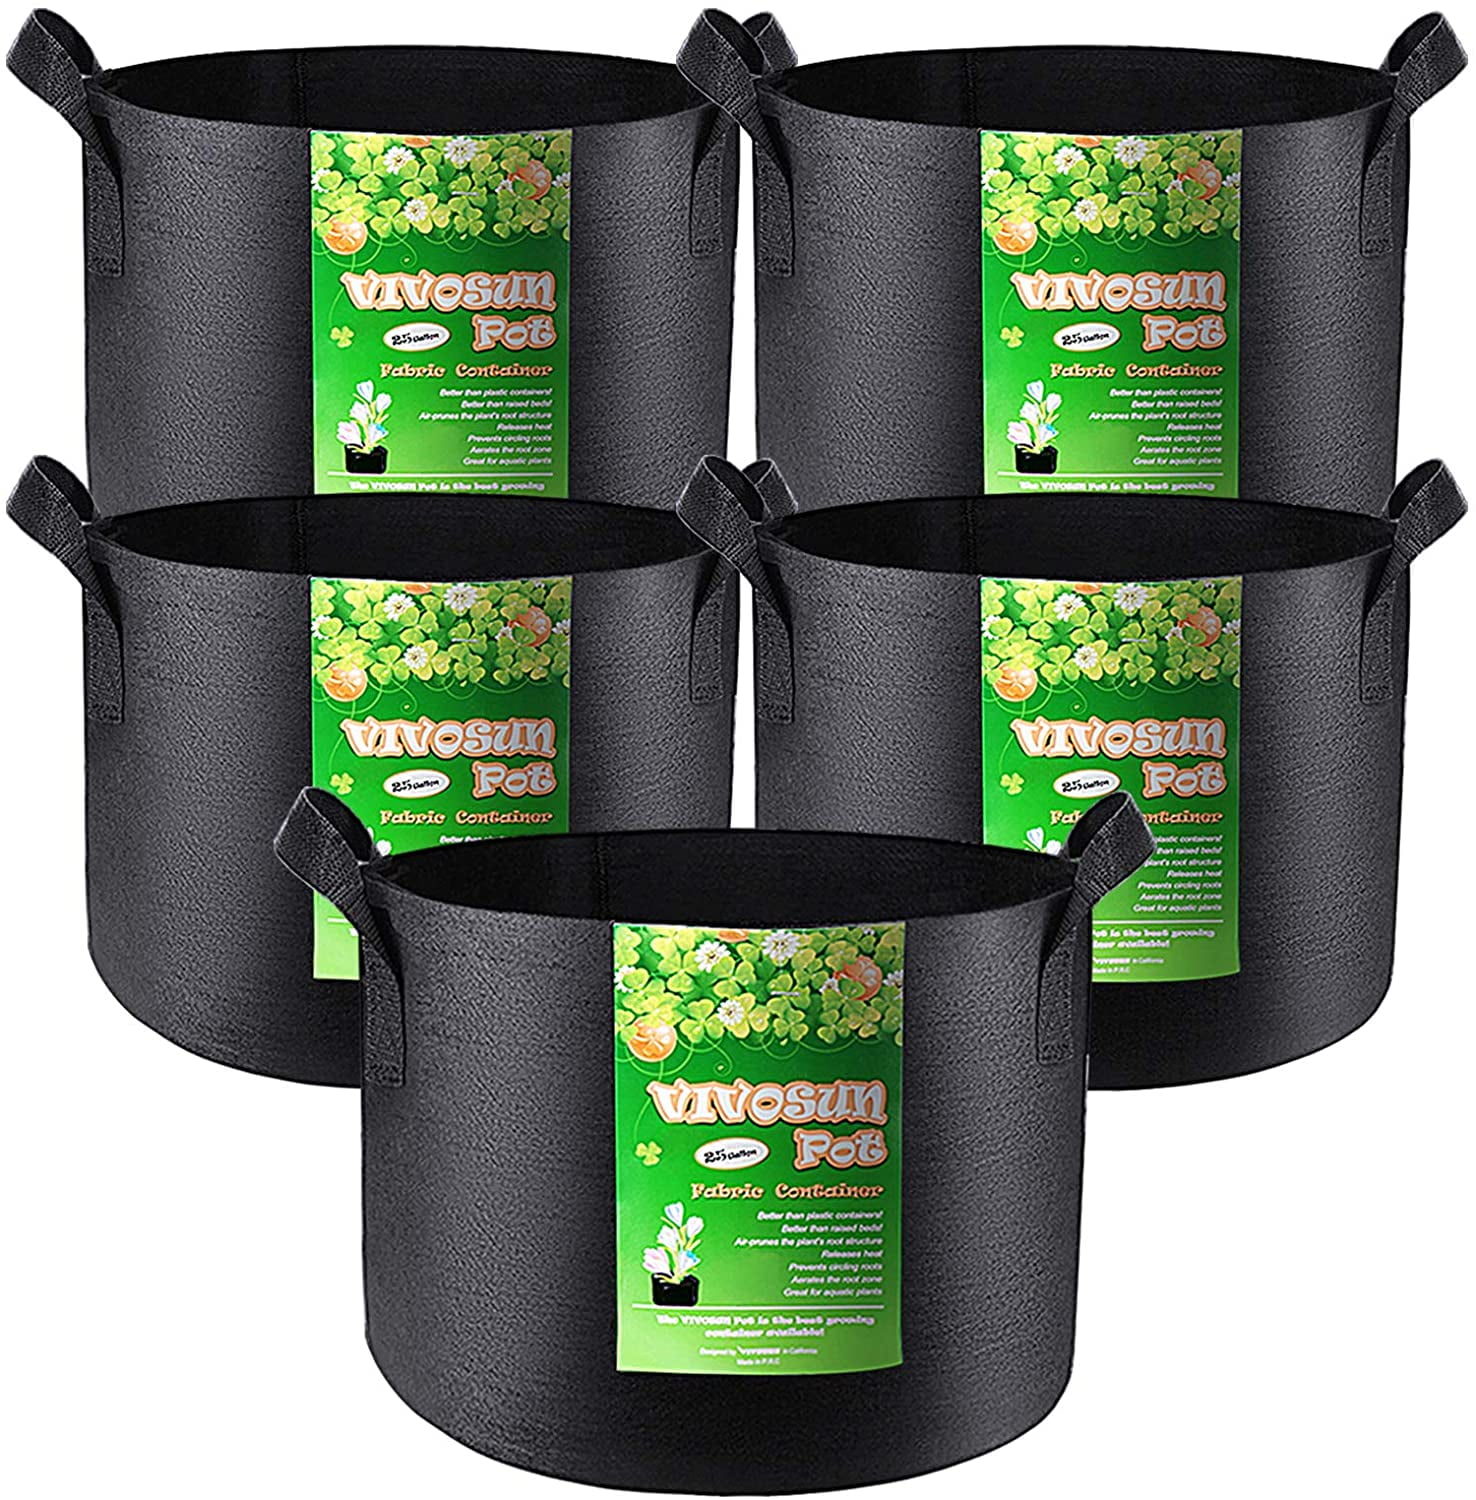  50 Pack 10 Gallon Plant Grow Bags, Breathable Felt Non-Woven  Aeration Fabric Plant Grow Pots, Garden Planting Containers for Nursery  Vegetable Flower Grow Bags with Handles (15.7x11.8inch) : Patio, Lawn